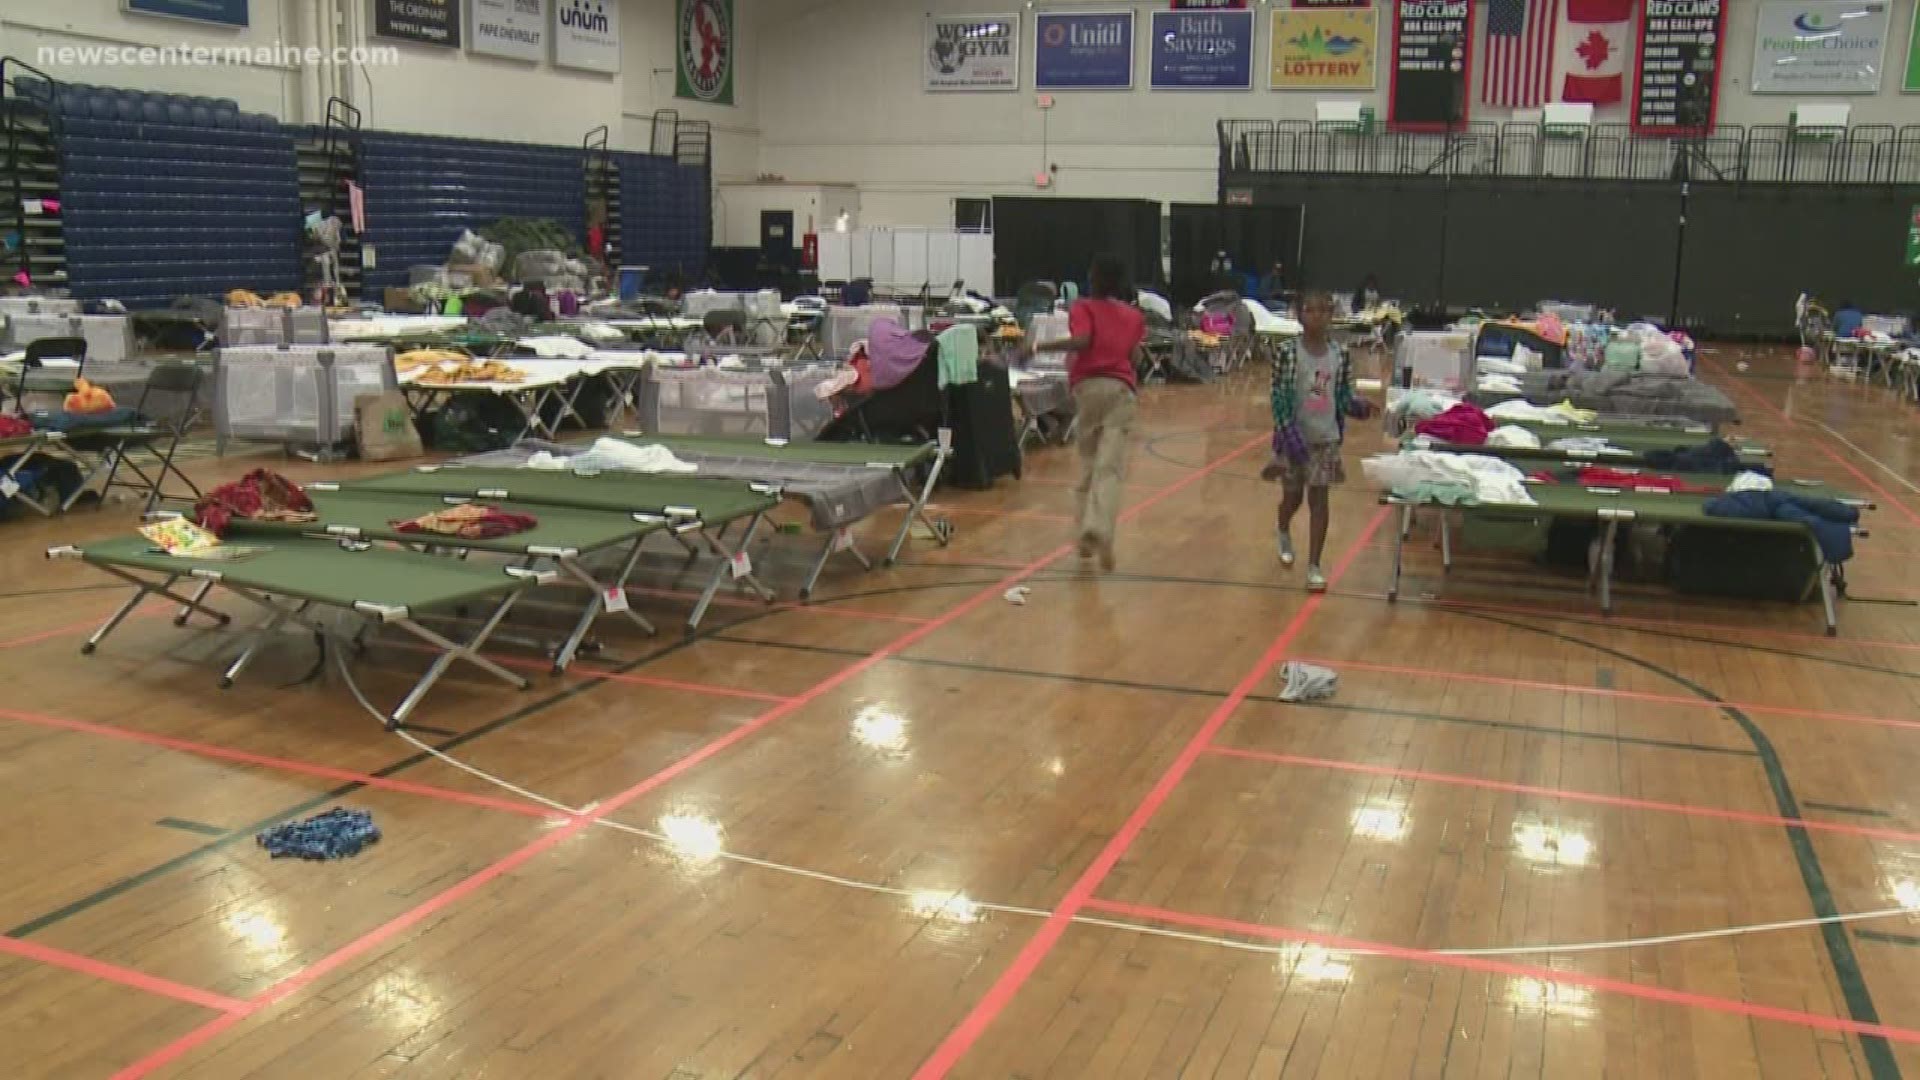 Asylum seekers still being housed at the Portland Expo.